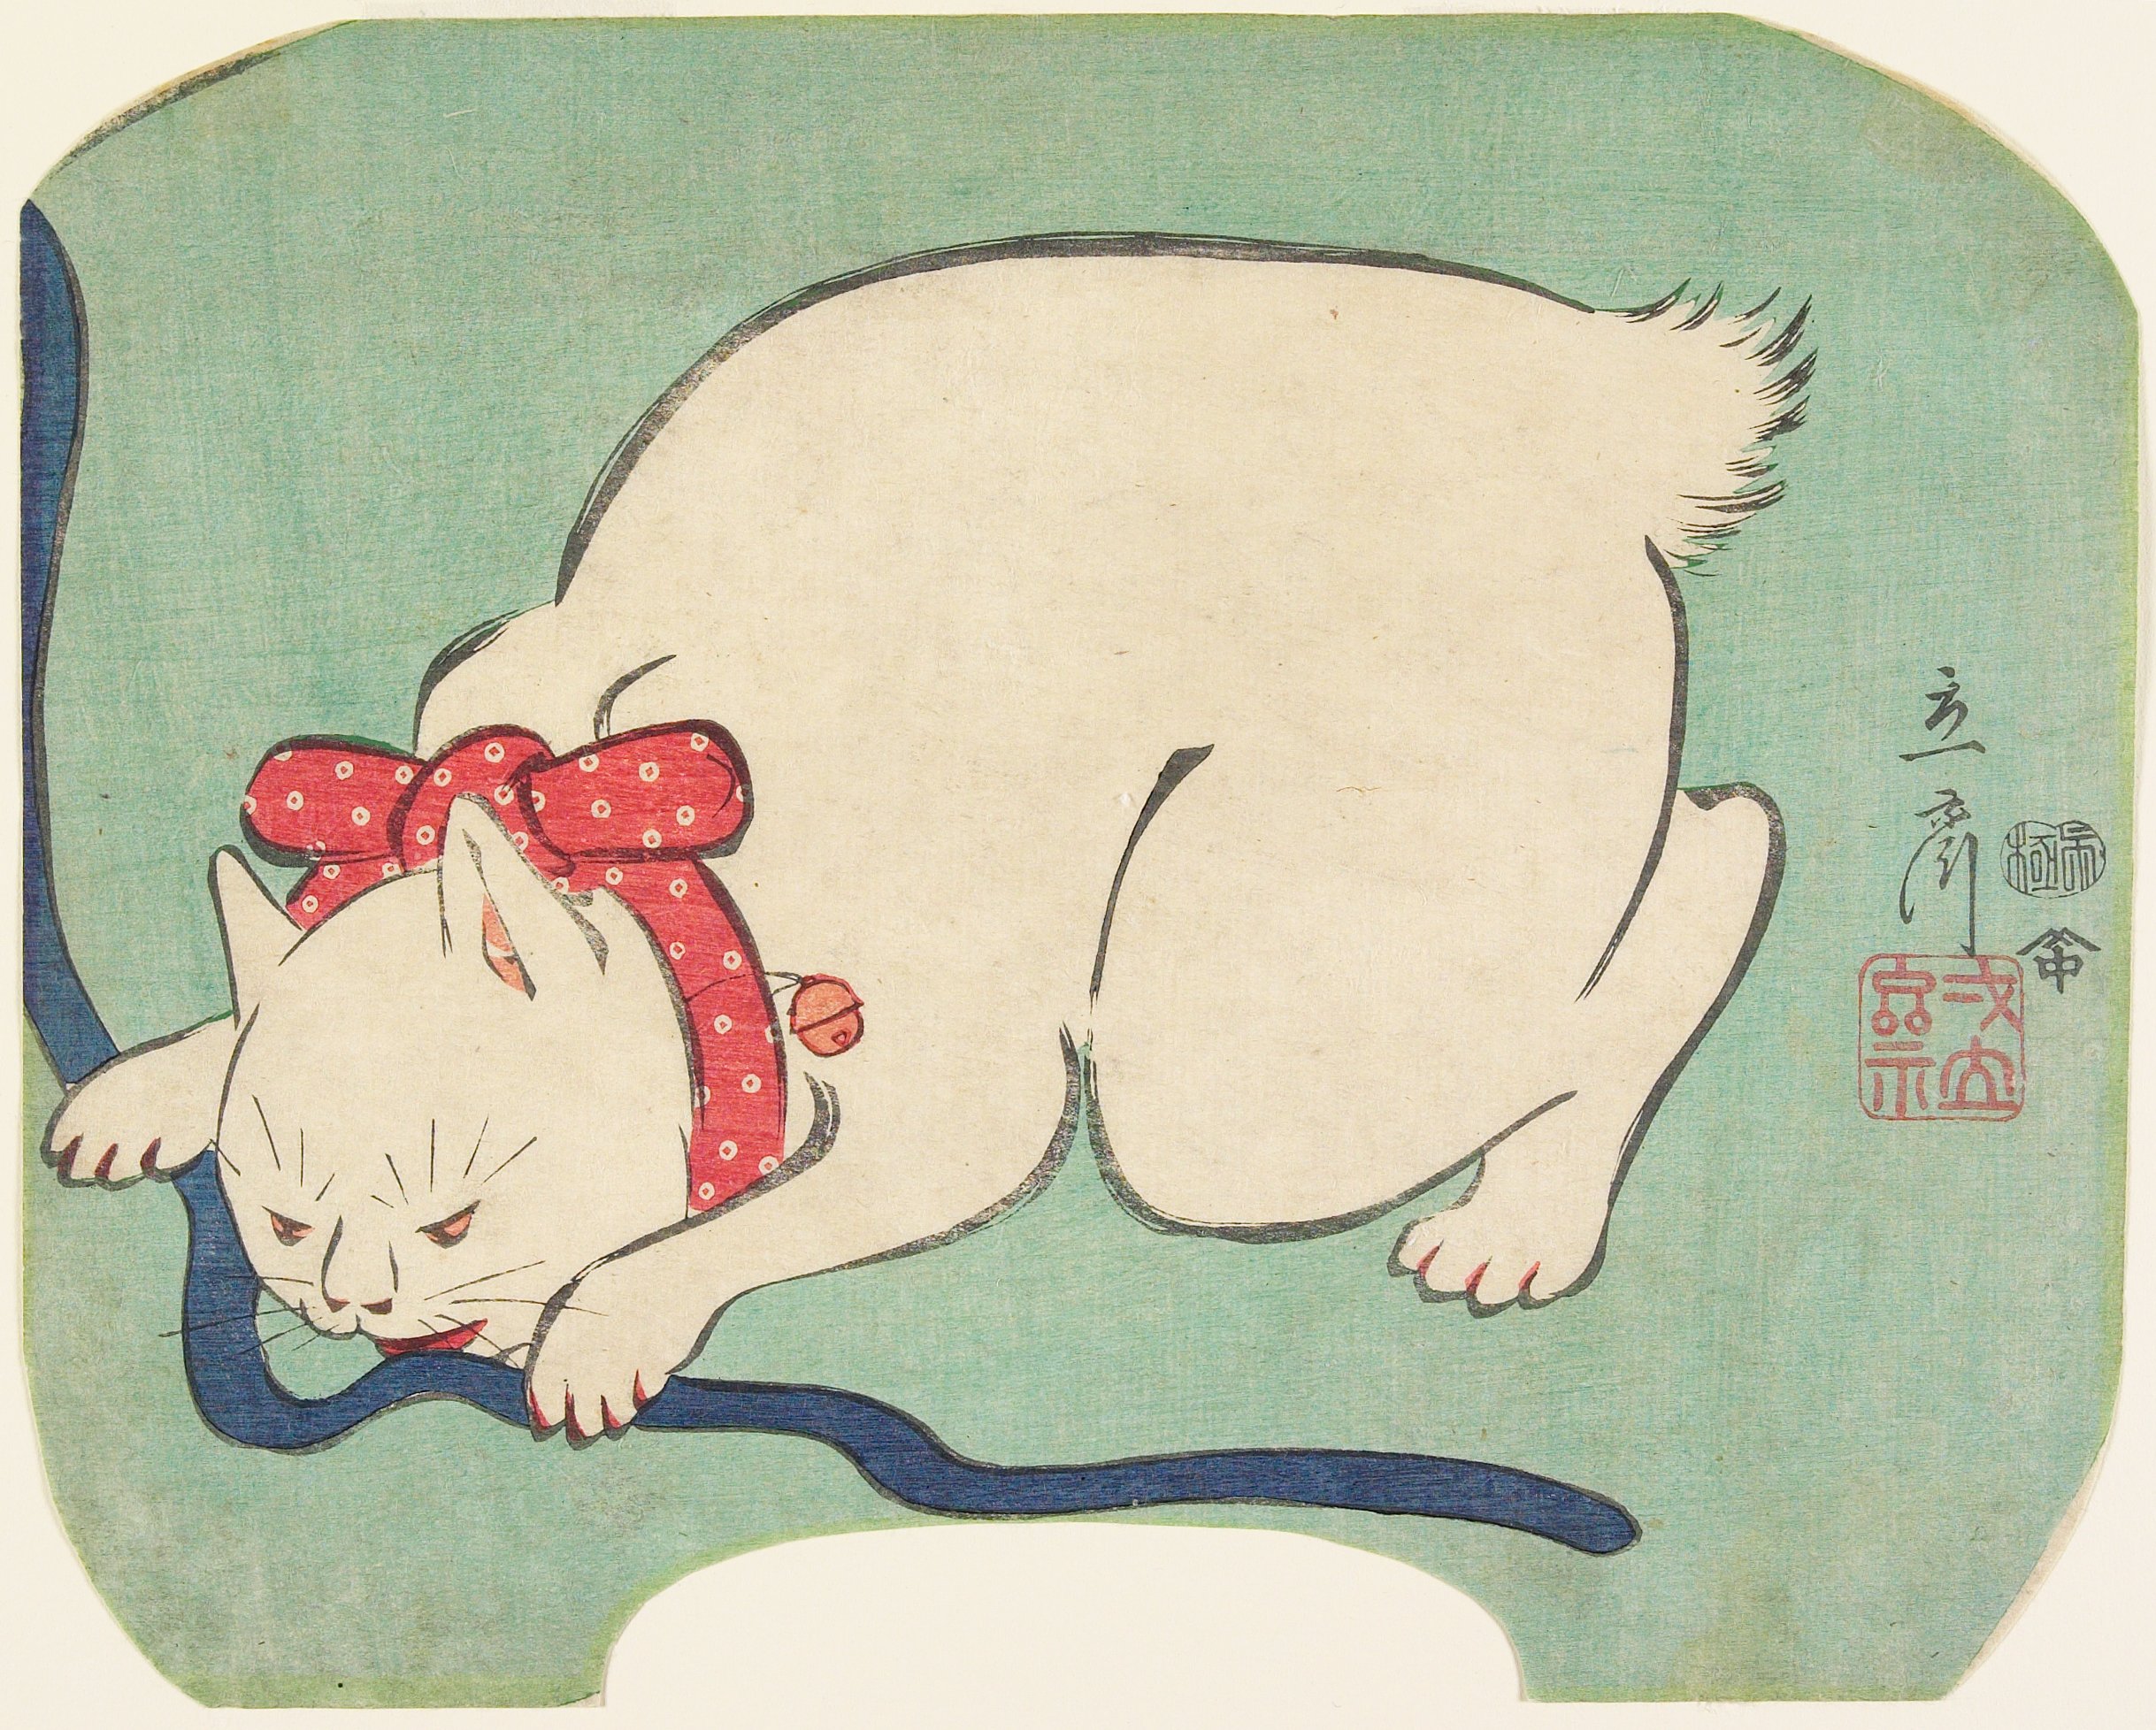 A White Cat Playing with a String by Hiroshige II - 1863 - 21.3 × 26.7 cm Minneapolis Institute of Art